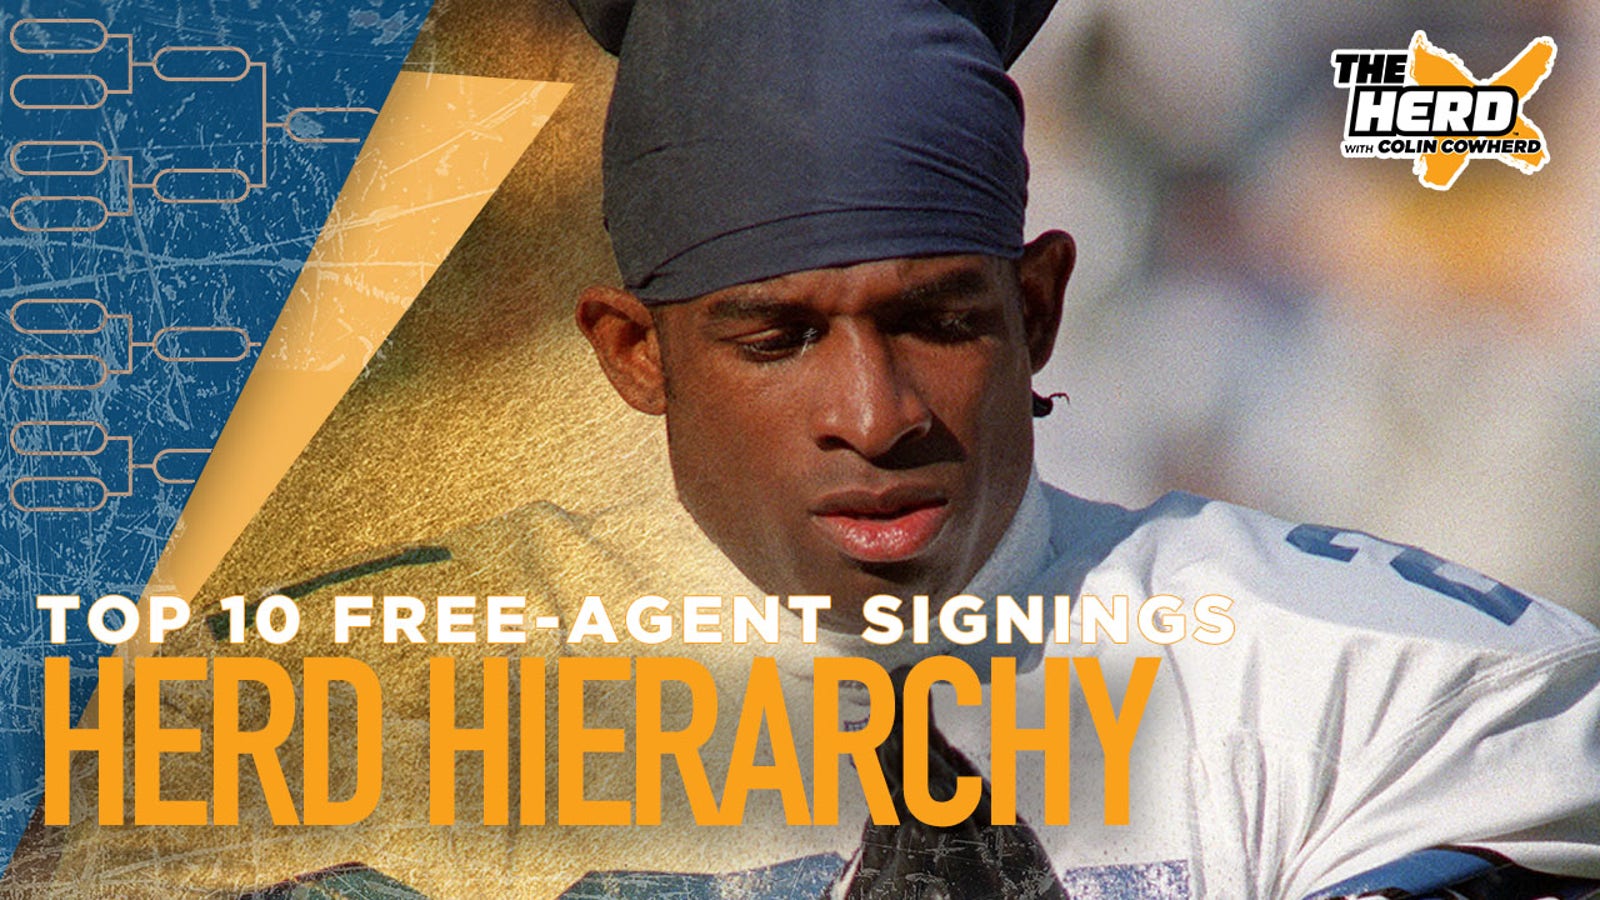 Herd Hierarchy: Colin Cowherd lists 10 best free-agent signings of all time | THE HERD